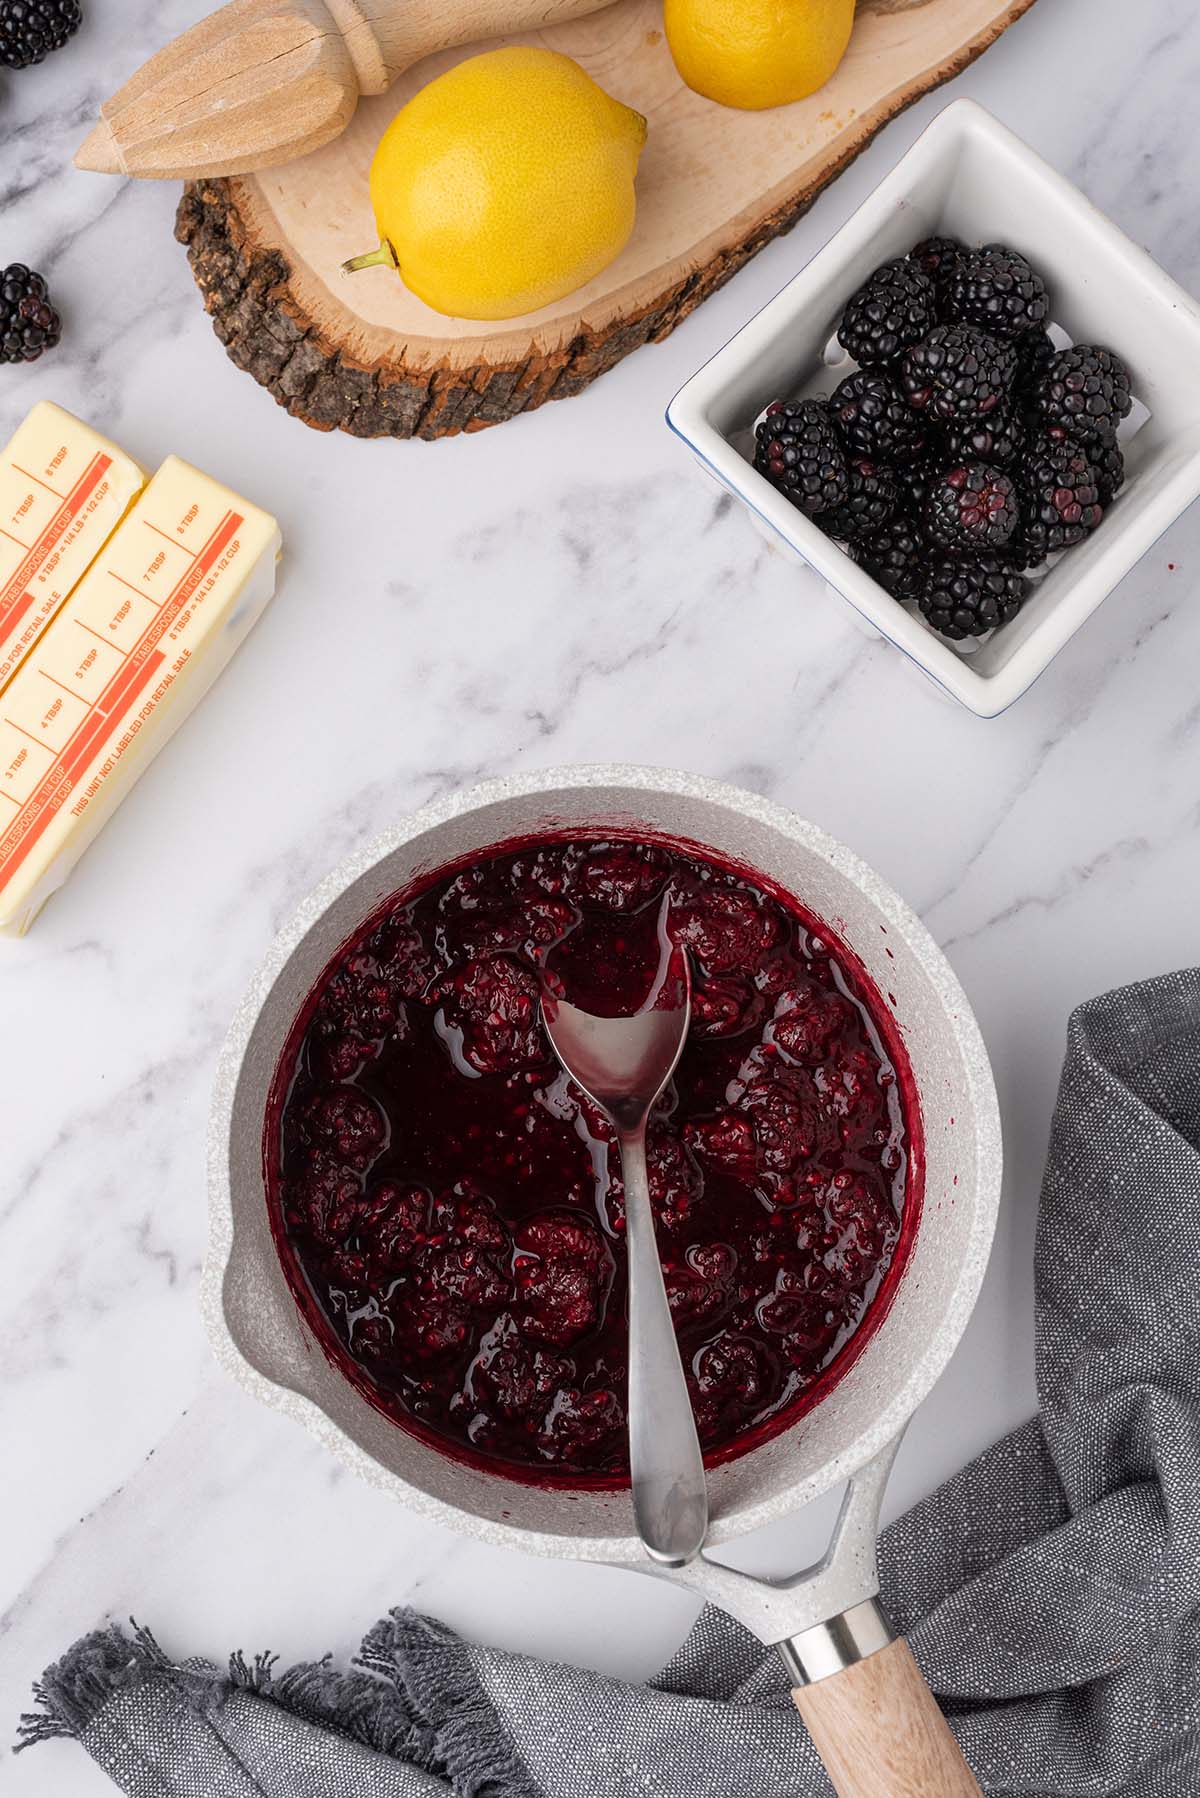 Mashed blackberries in a white bowl with a spoon.